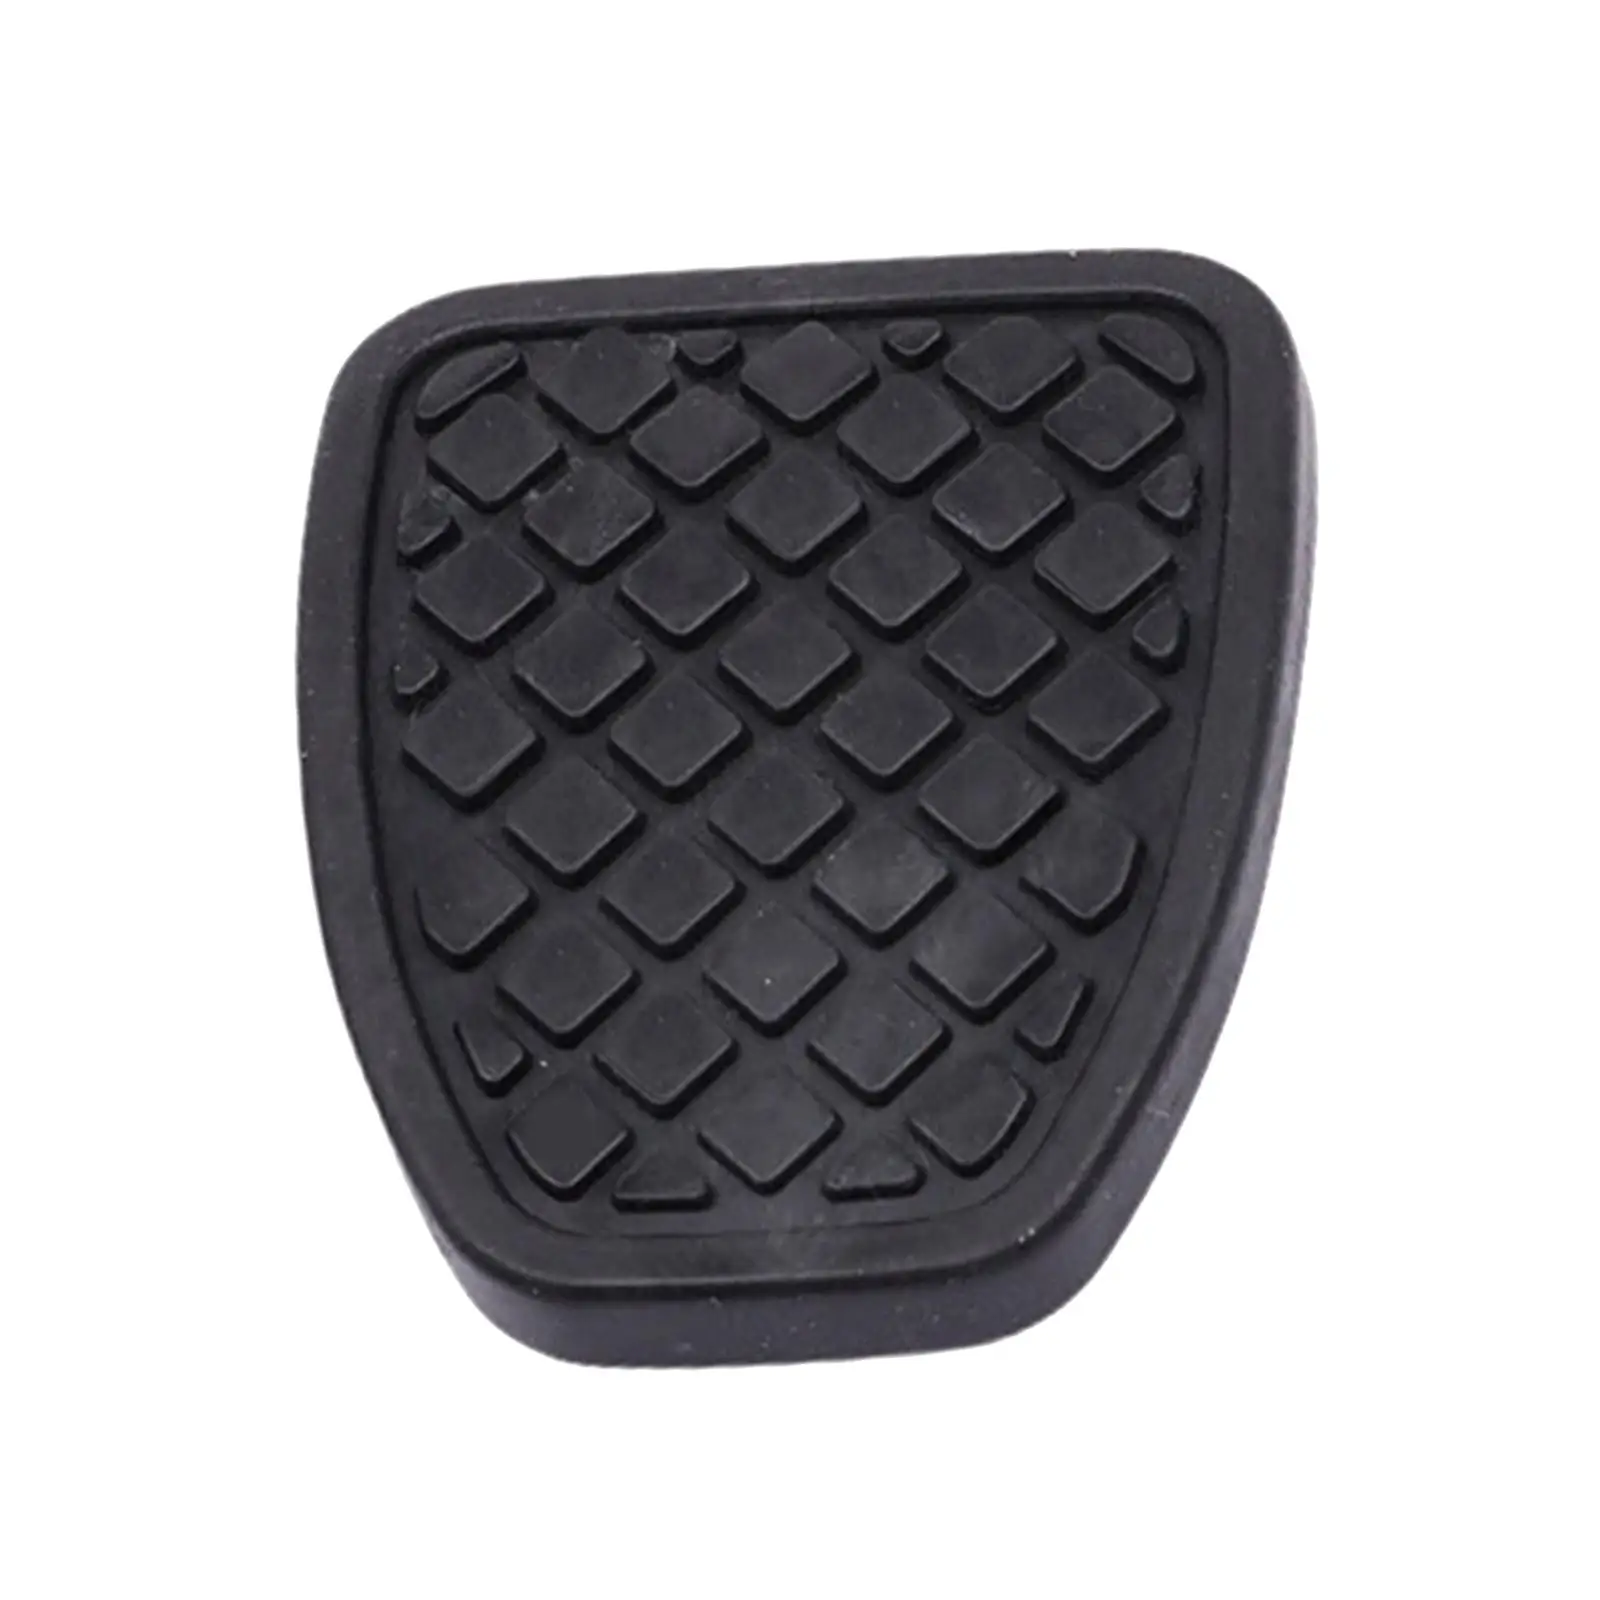 Rubber Brake Clutch Pedal Pad Durable Replacement Parts Auto Accessories 73601-5010 for Subaru Legacy II III IV V Impreza